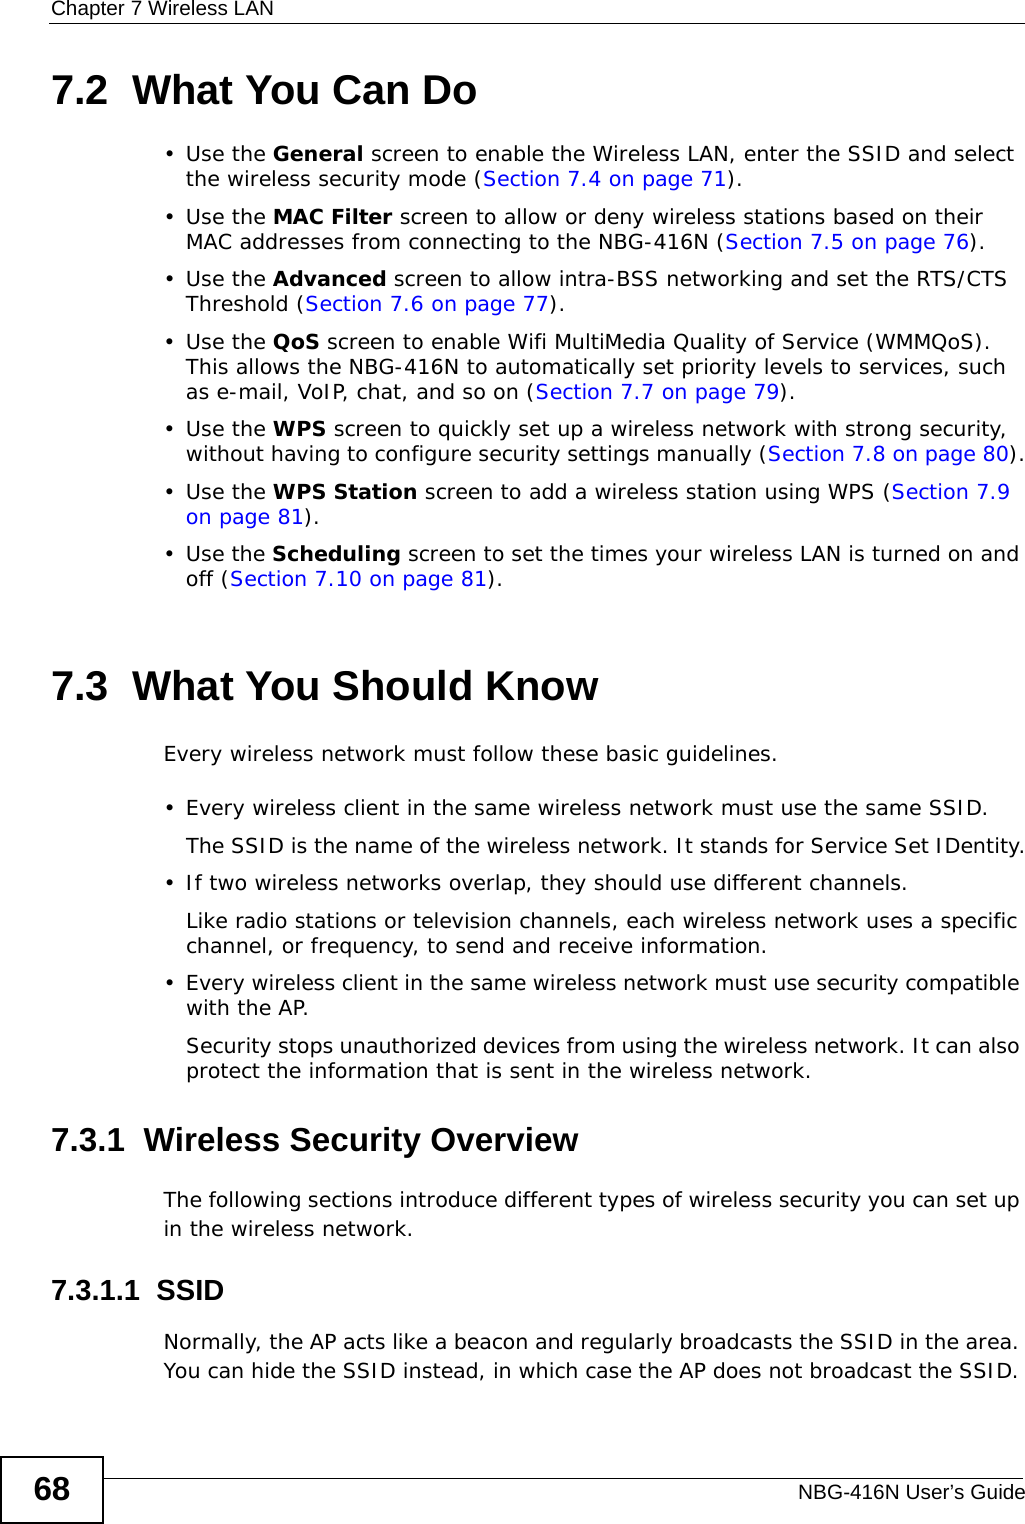 Chapter 7 Wireless LANNBG-416N User’s Guide687.2  What You Can Do•Use the General screen to enable the Wireless LAN, enter the SSID and select the wireless security mode (Section 7.4 on page 71).•Use the MAC Filter screen to allow or deny wireless stations based on their MAC addresses from connecting to the NBG-416N (Section 7.5 on page 76).•Use the Advanced screen to allow intra-BSS networking and set the RTS/CTS Threshold (Section 7.6 on page 77).•Use the QoS screen to enable Wifi MultiMedia Quality of Service (WMMQoS). This allows the NBG-416N to automatically set priority levels to services, such as e-mail, VoIP, chat, and so on (Section 7.7 on page 79).•Use the WPS screen to quickly set up a wireless network with strong security, without having to configure security settings manually (Section 7.8 on page 80).•Use the WPS Station screen to add a wireless station using WPS (Section 7.9 on page 81). •Use the Scheduling screen to set the times your wireless LAN is turned on and off (Section 7.10 on page 81).7.3  What You Should KnowEvery wireless network must follow these basic guidelines.• Every wireless client in the same wireless network must use the same SSID.The SSID is the name of the wireless network. It stands for Service Set IDentity.• If two wireless networks overlap, they should use different channels.Like radio stations or television channels, each wireless network uses a specific channel, or frequency, to send and receive information.• Every wireless client in the same wireless network must use security compatible with the AP.Security stops unauthorized devices from using the wireless network. It can also protect the information that is sent in the wireless network.7.3.1  Wireless Security OverviewThe following sections introduce different types of wireless security you can set up in the wireless network.7.3.1.1  SSIDNormally, the AP acts like a beacon and regularly broadcasts the SSID in the area. You can hide the SSID instead, in which case the AP does not broadcast the SSID. 